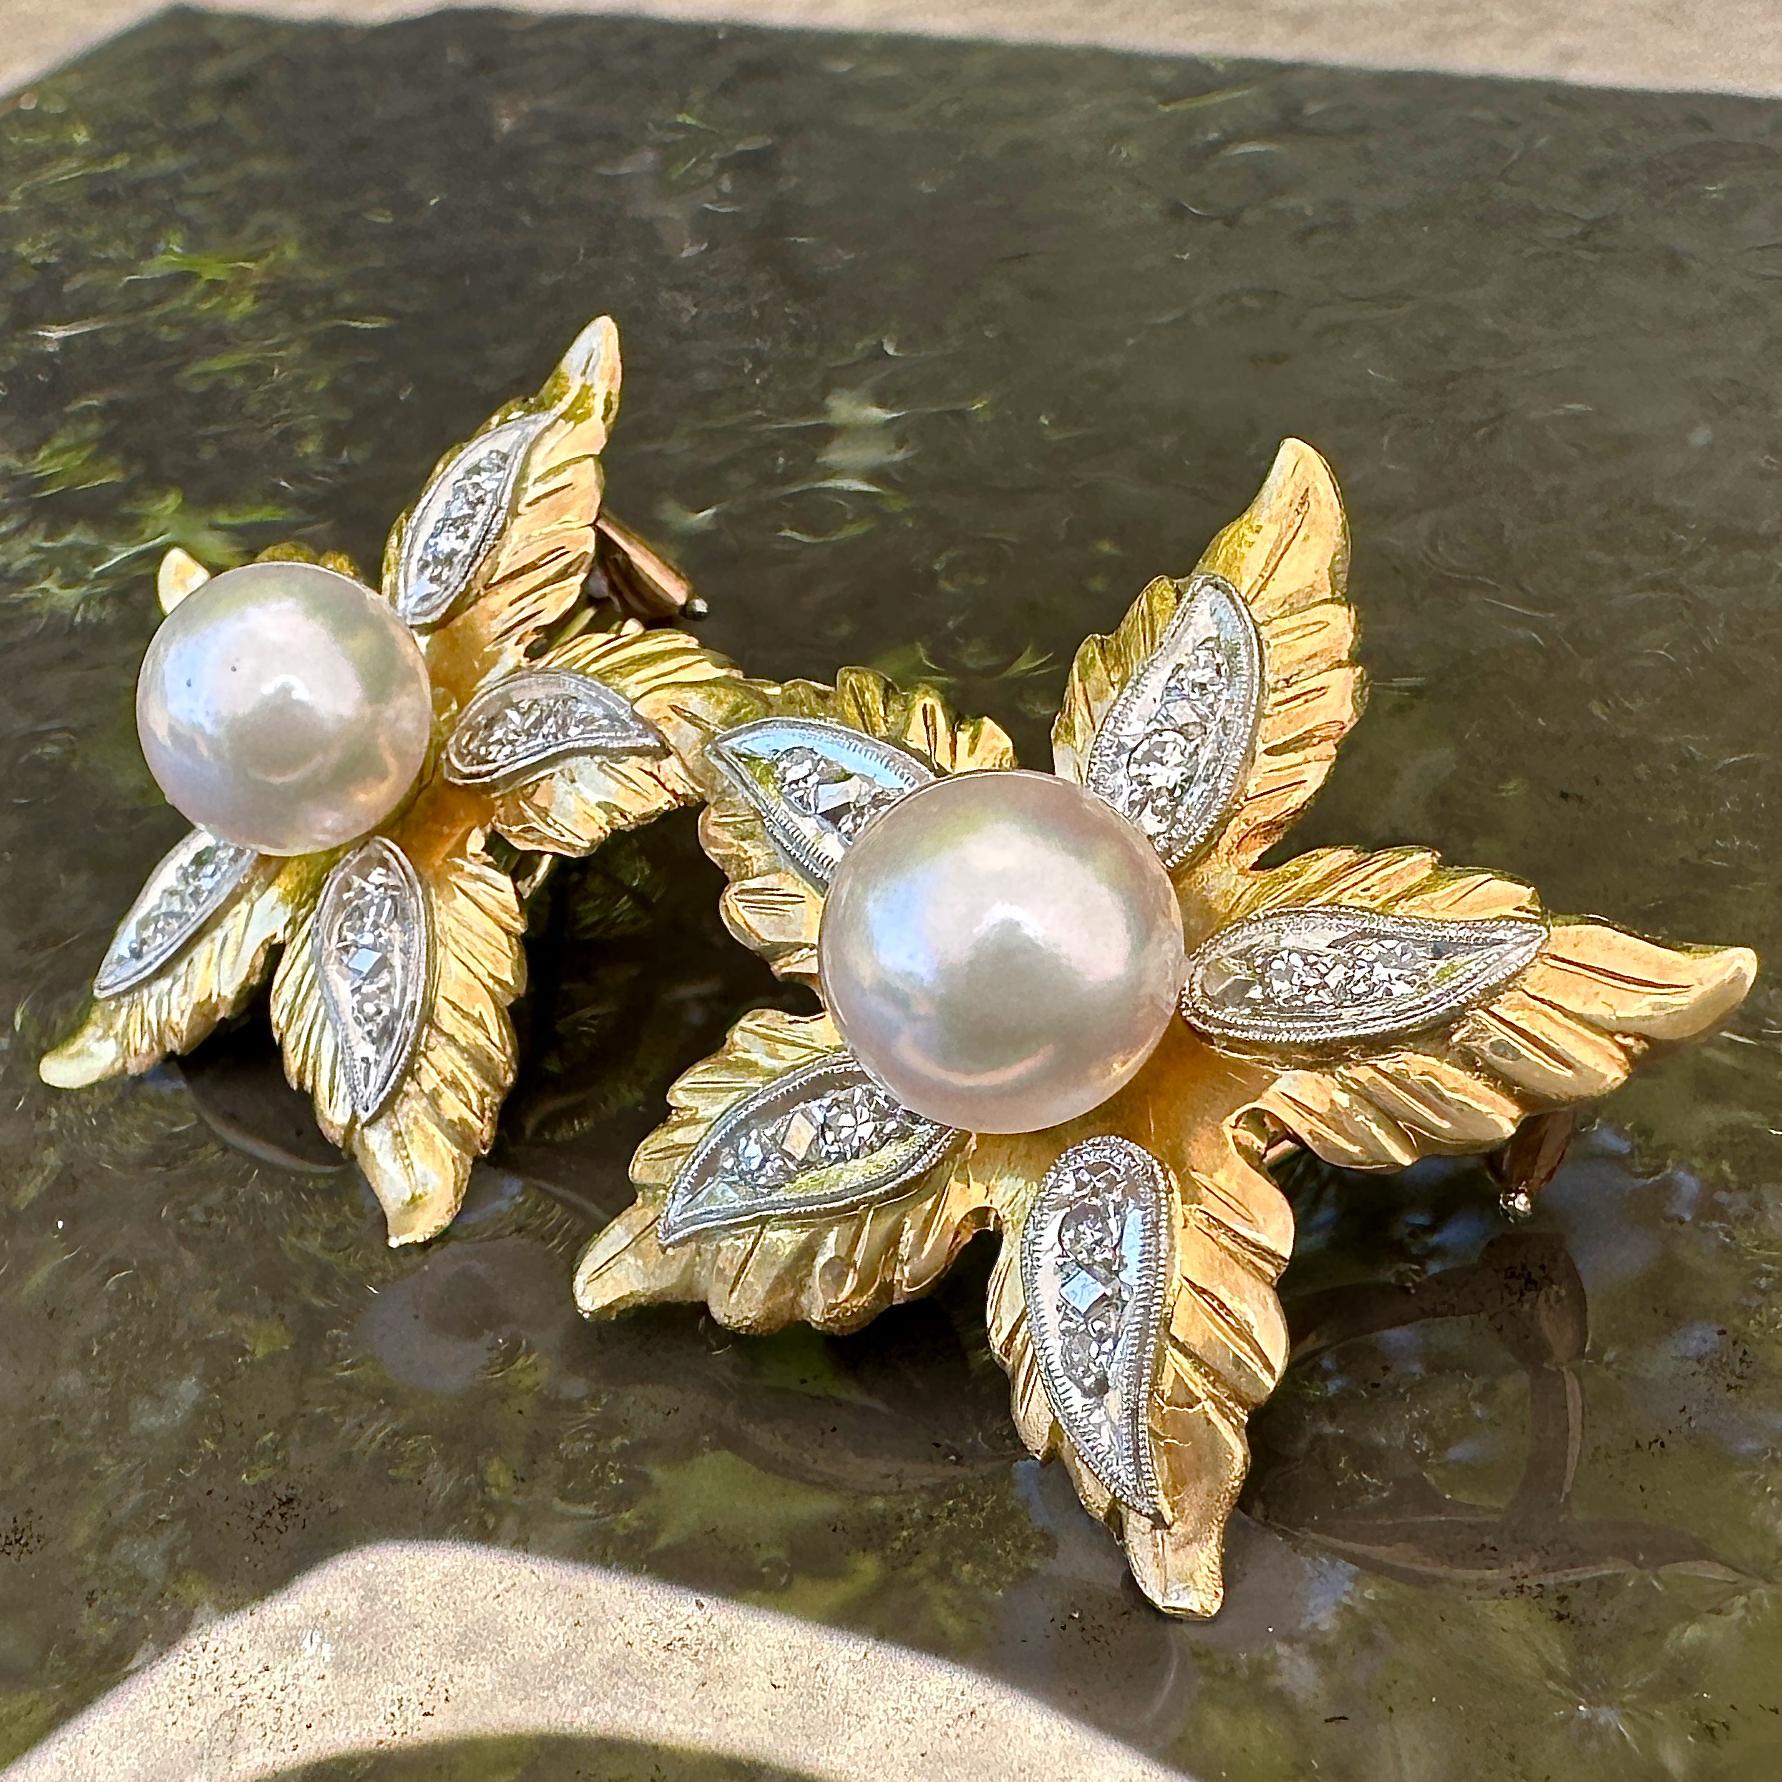 8.5mm Akoya Pearls in Large Flower Earrings of 18K Gold & Platinum with Diamonds For Sale 5